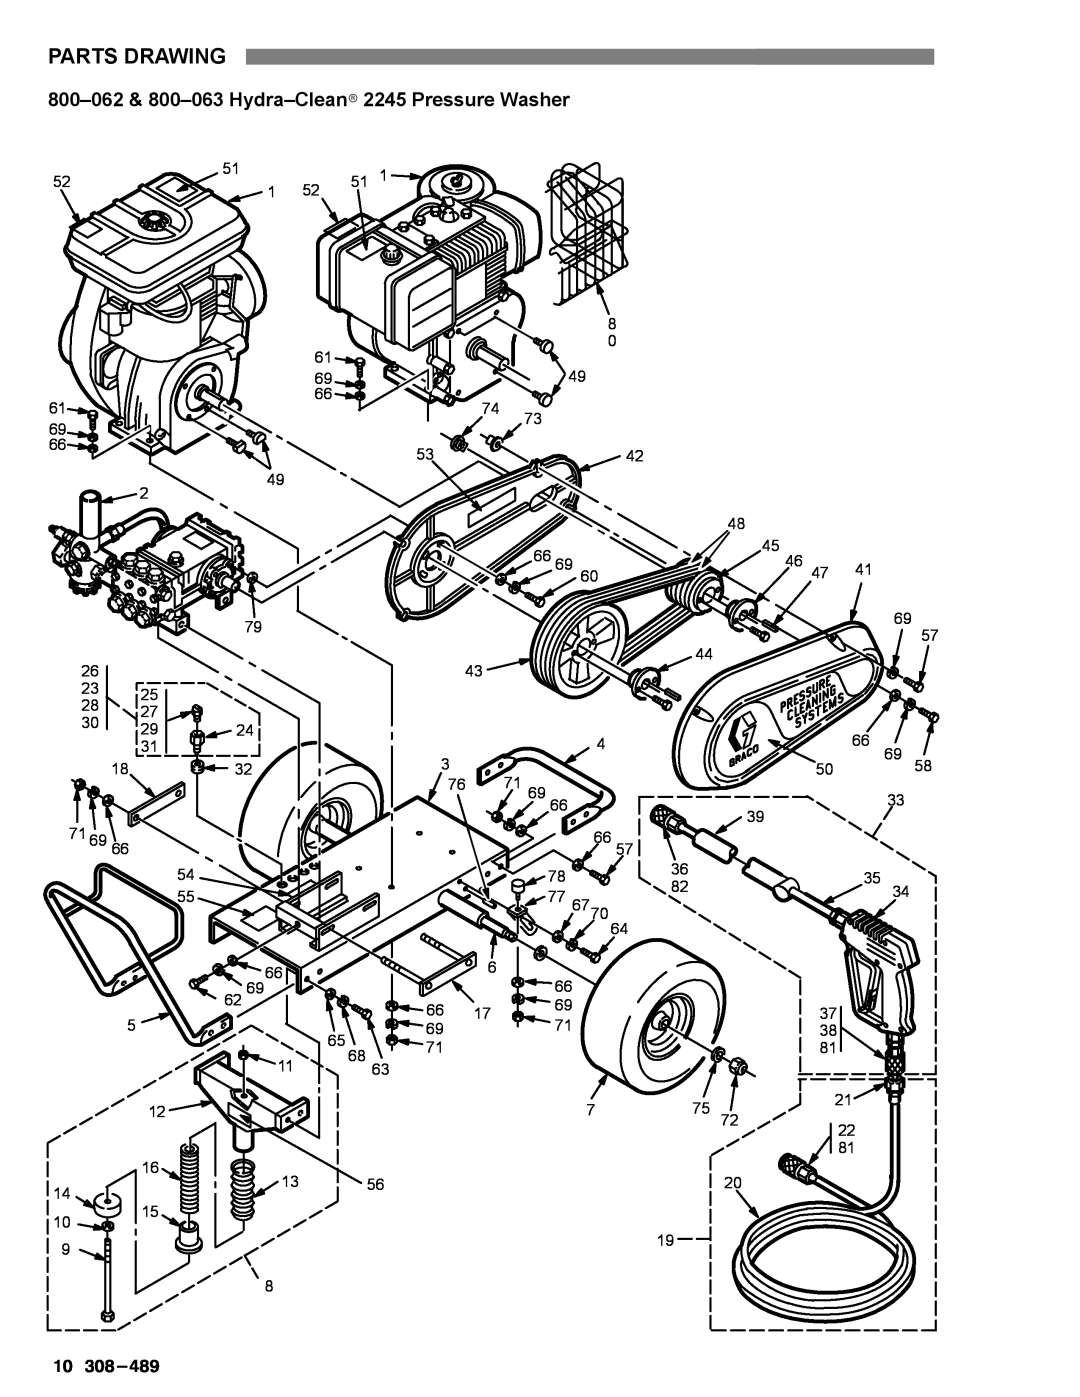 Graco Inc 800-065, 308-501, 800-335, 3035 manual Parts Drawing, 800-062 & 800-063 Hydra-Cleanr 2245 Pressure Washer 